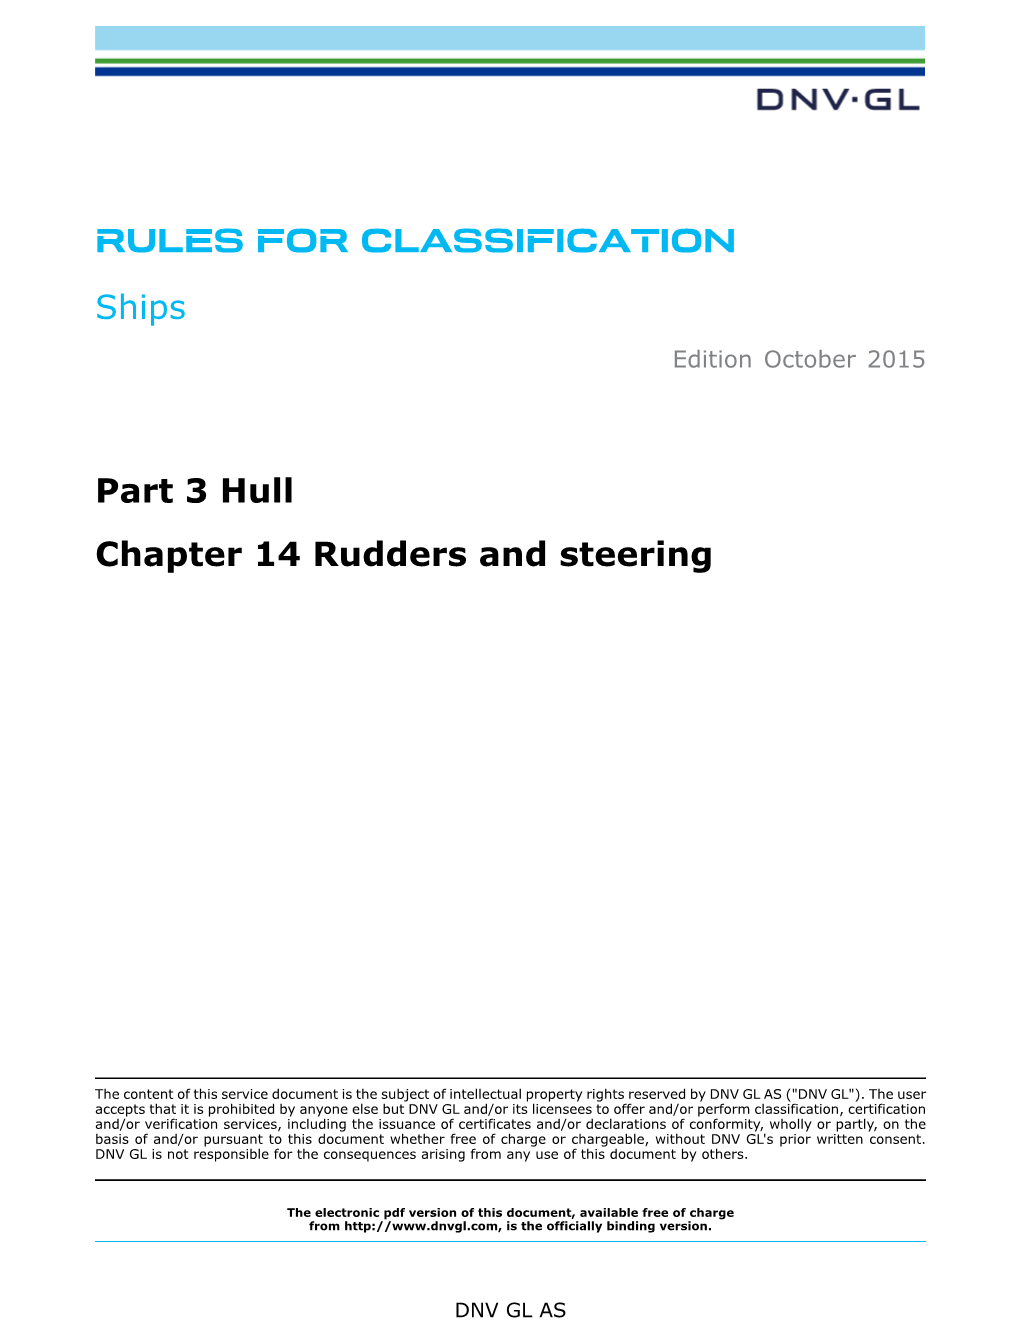 DNVGL-RU-SHIP-Pt3ch14 Rudders and Steering